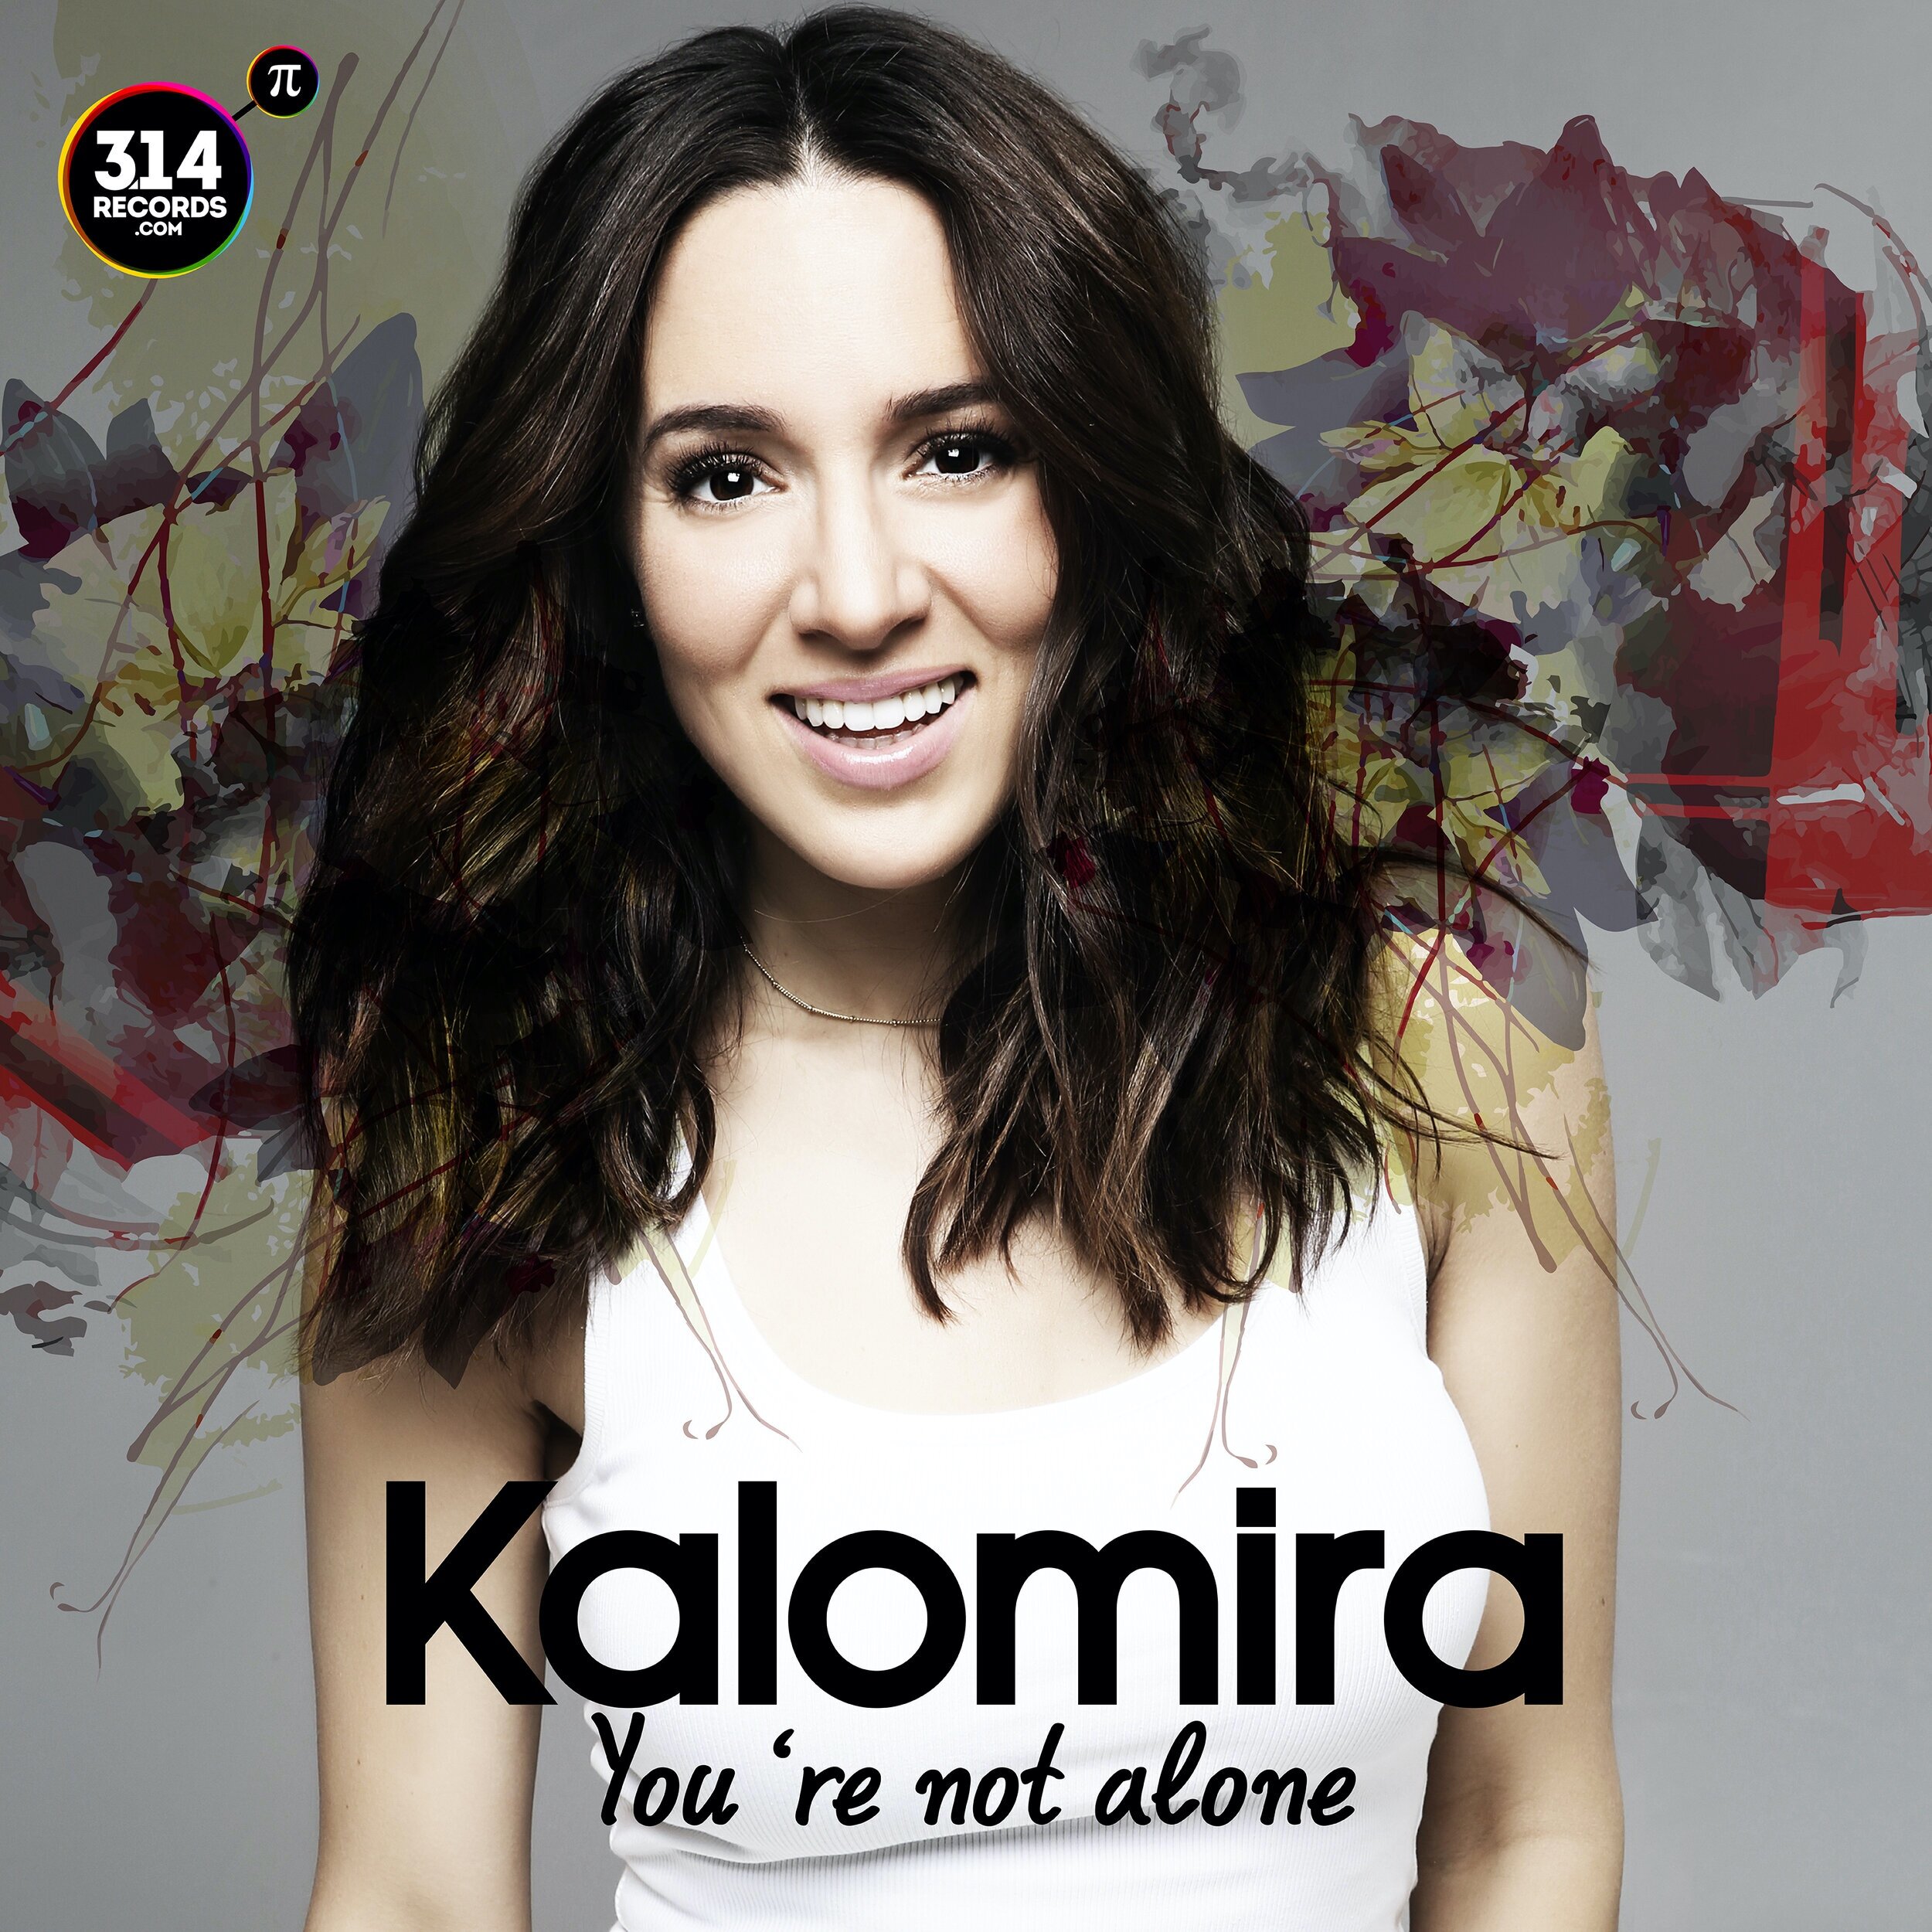 You're not alone (English Version)